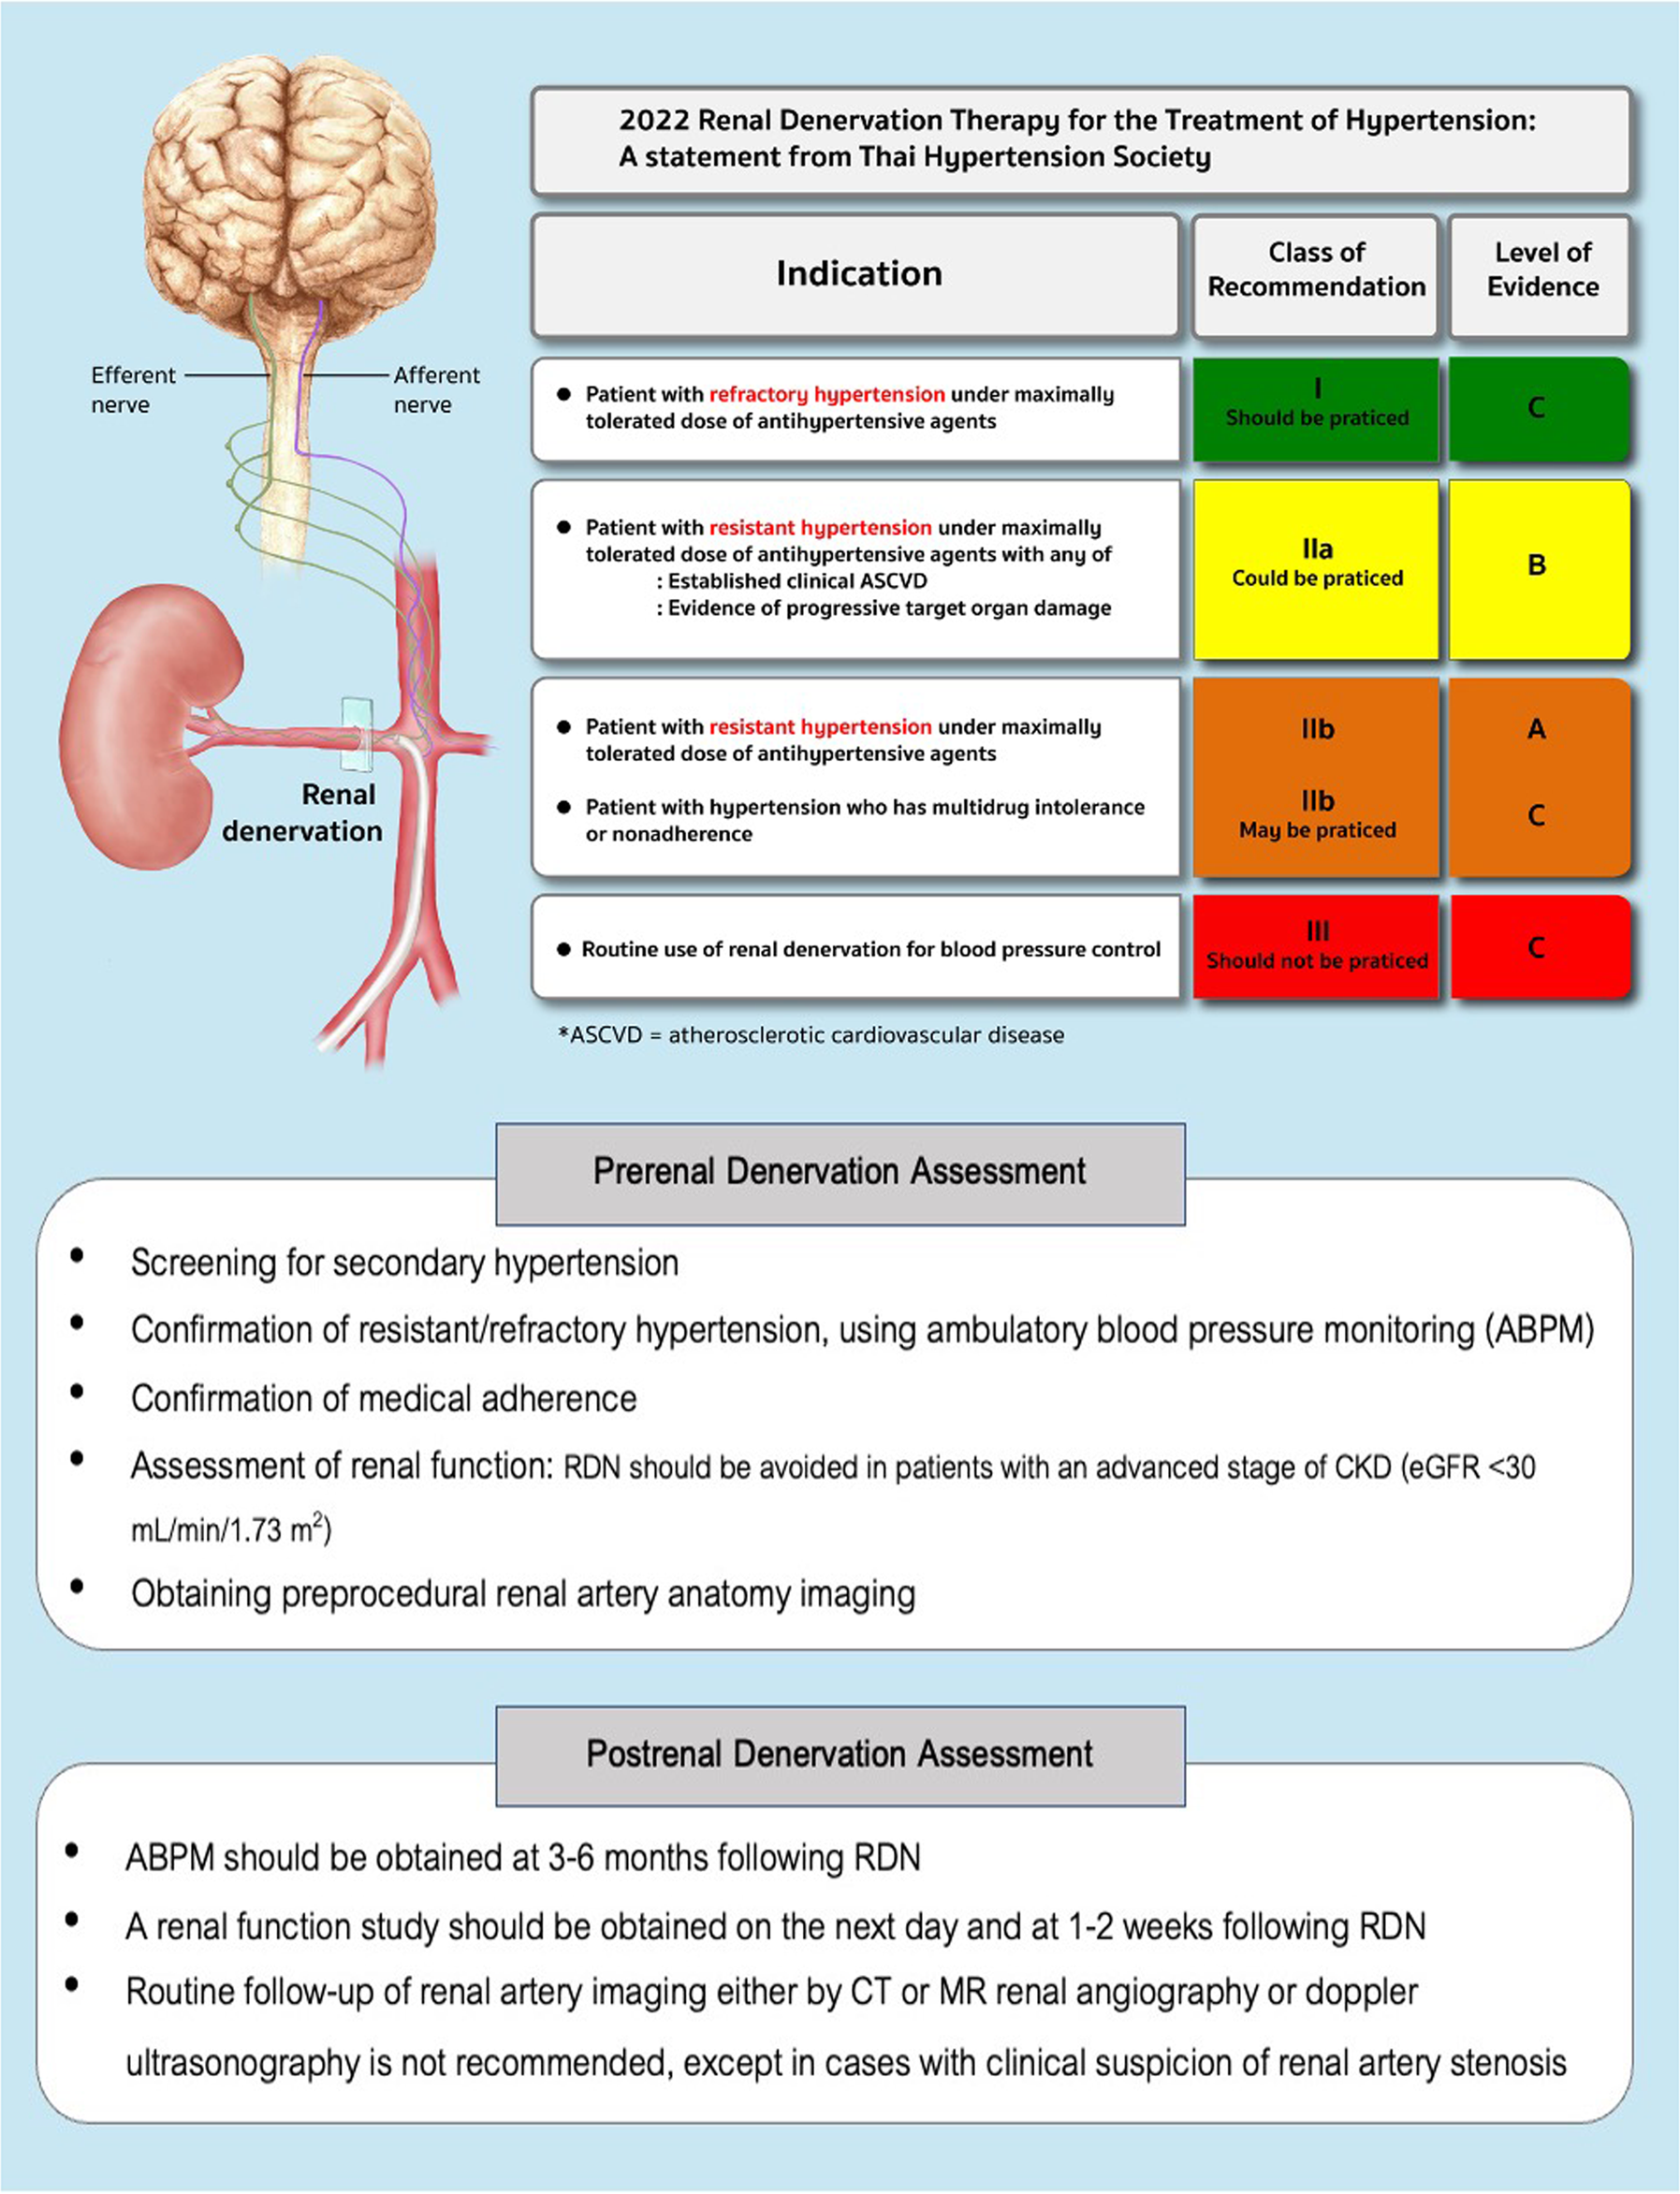 2022 Renal denervation therapy for the treatment of hypertension: a  statement from the Thai Hypertension Society | Hypertension Research